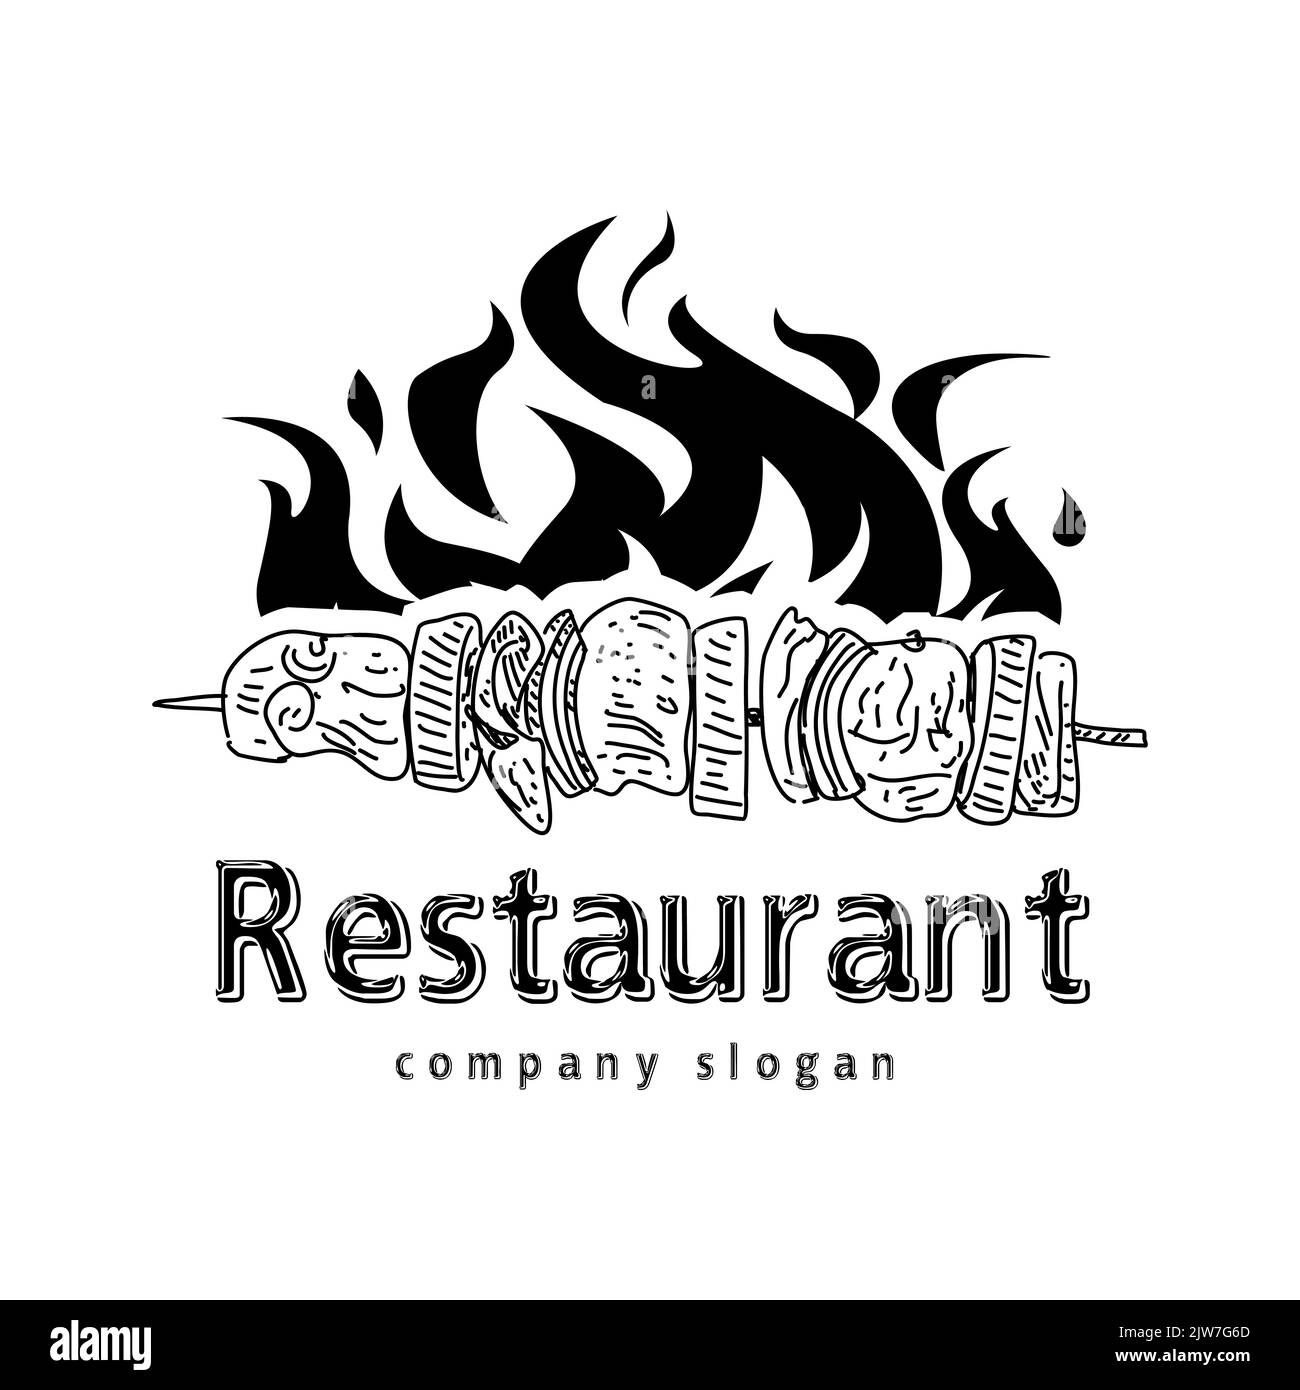 Flame and text designs as well as grill elements shish kebab logo. Vector illustration. Stock Vector